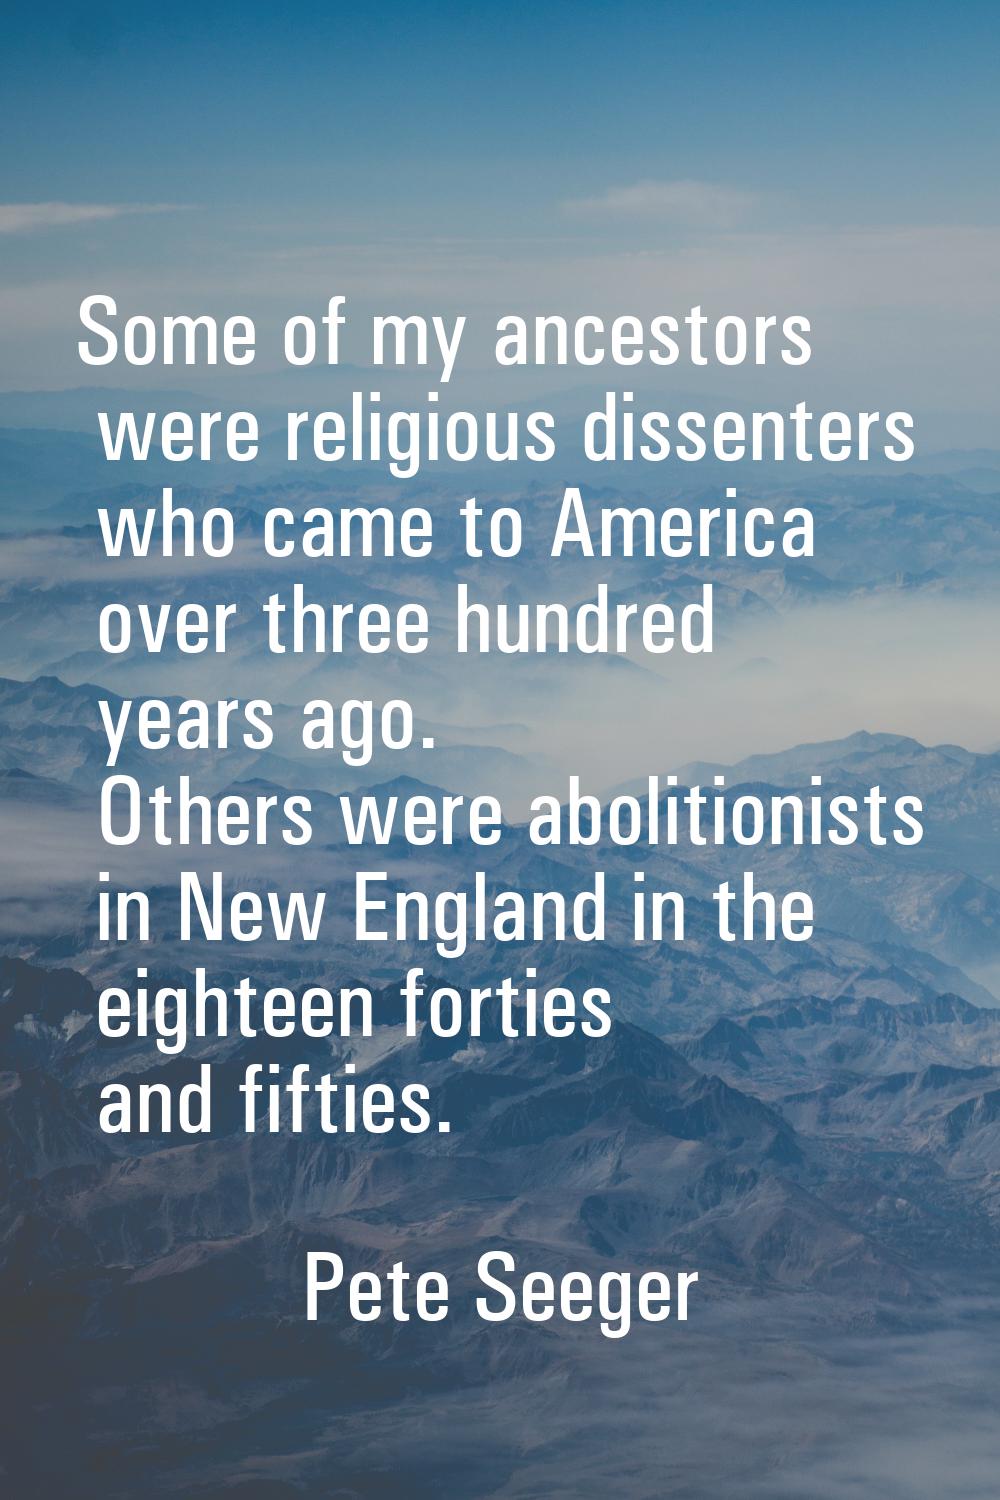 Some of my ancestors were religious dissenters who came to America over three hundred years ago. Ot